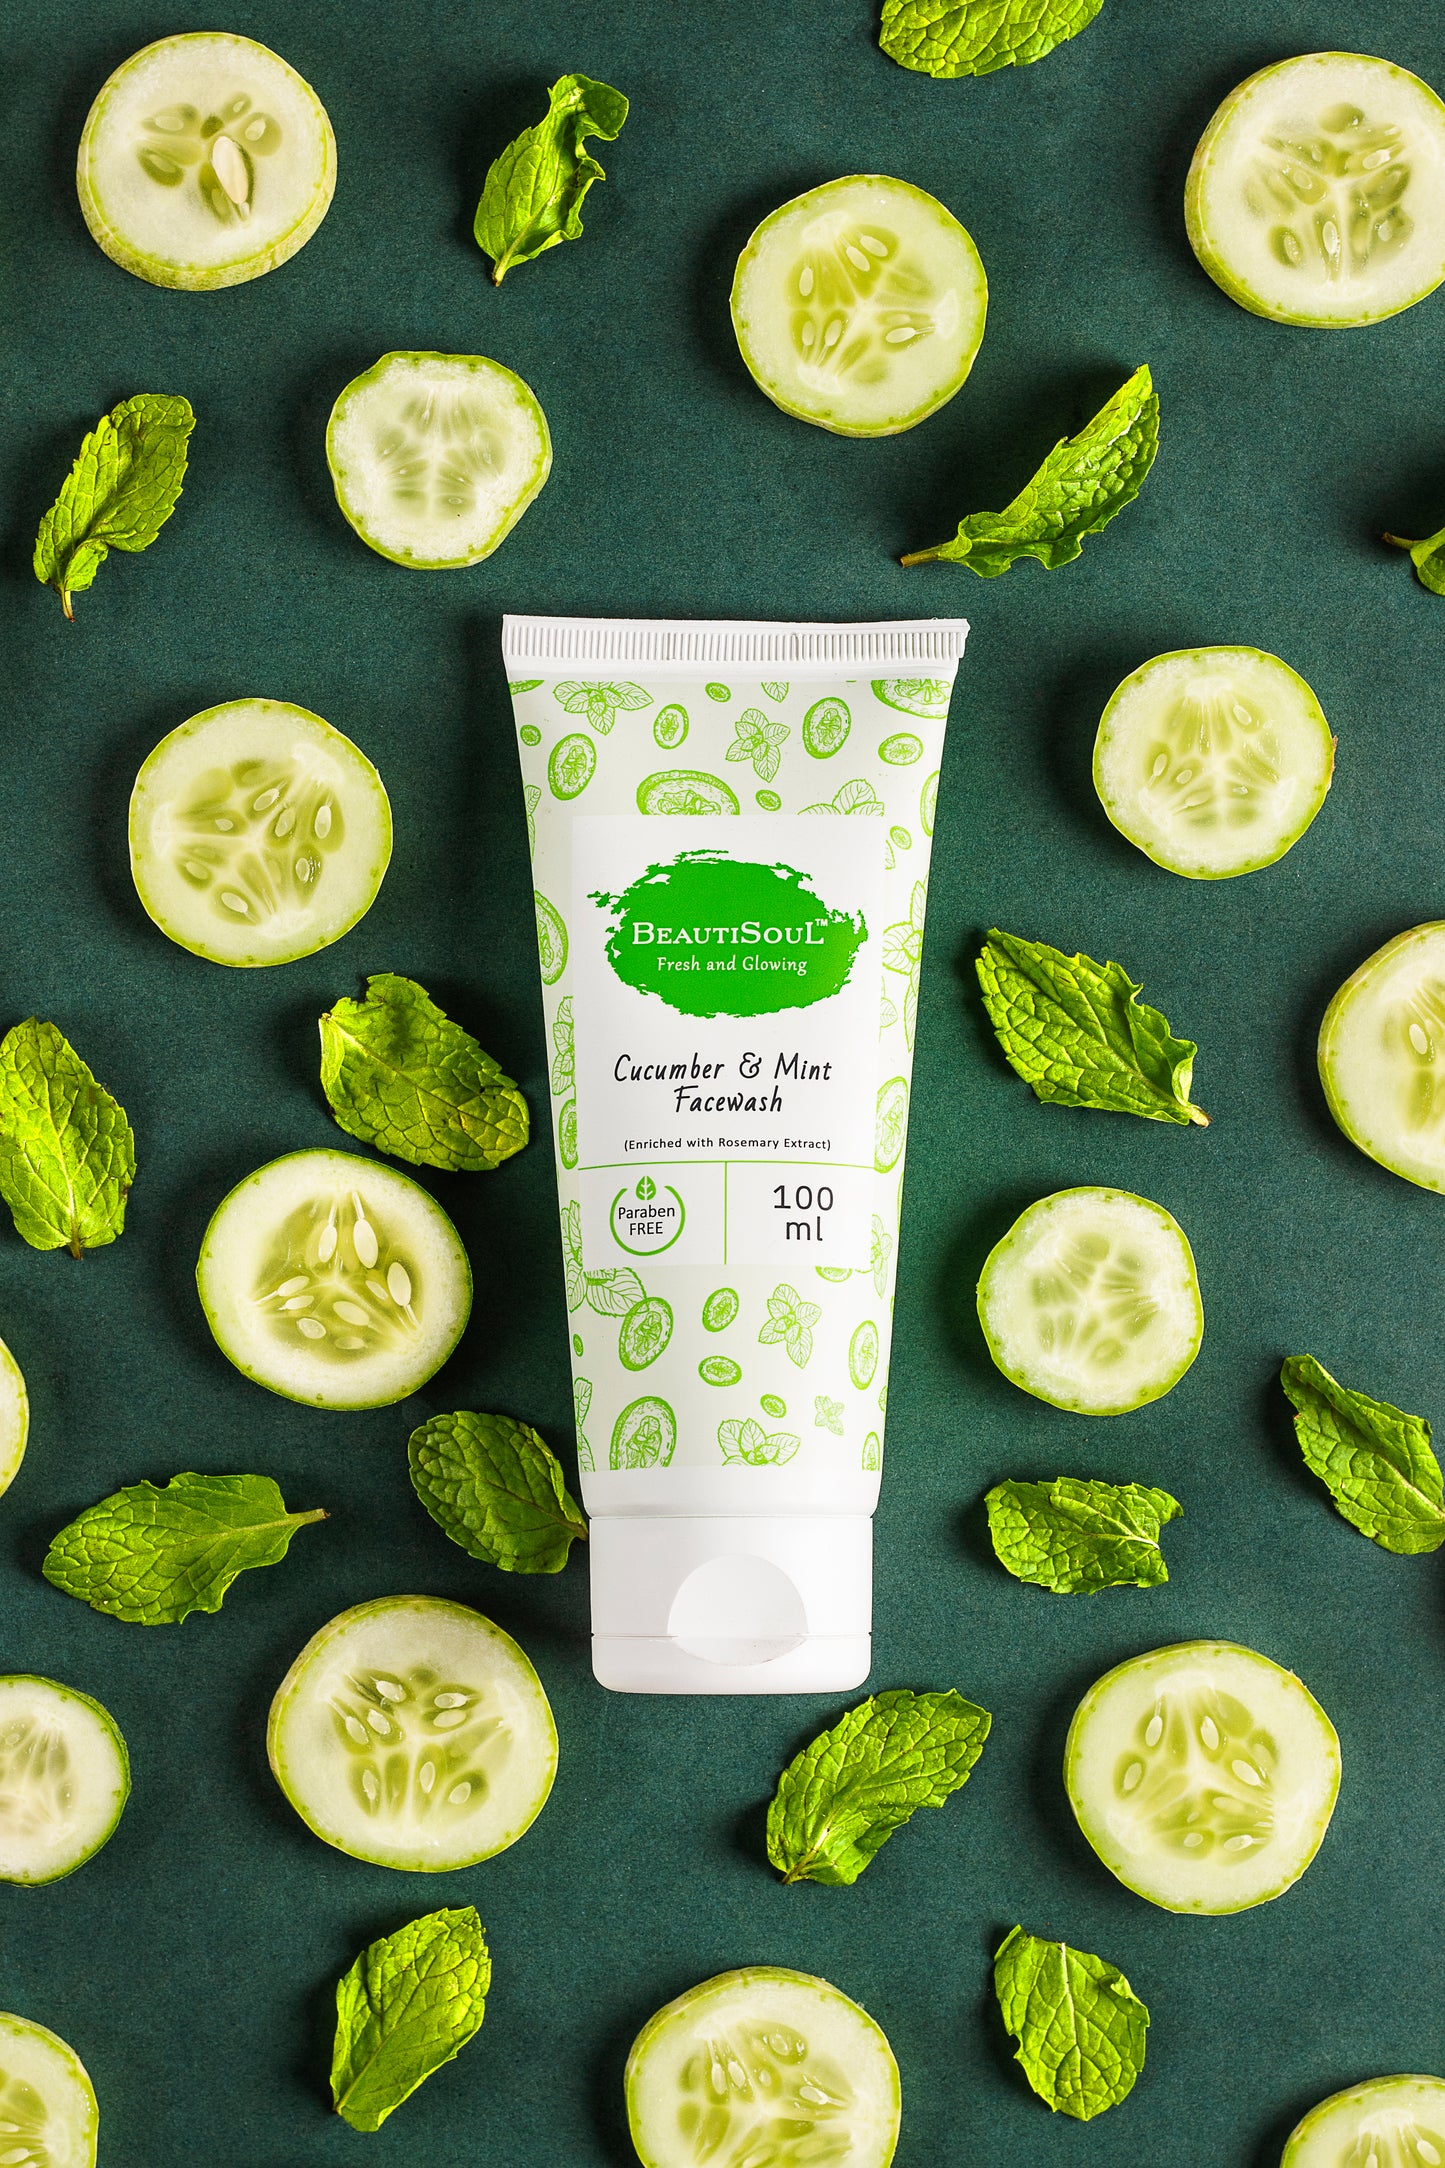 Beautisoul Cucumber and Mint Face Wash - 100 ml